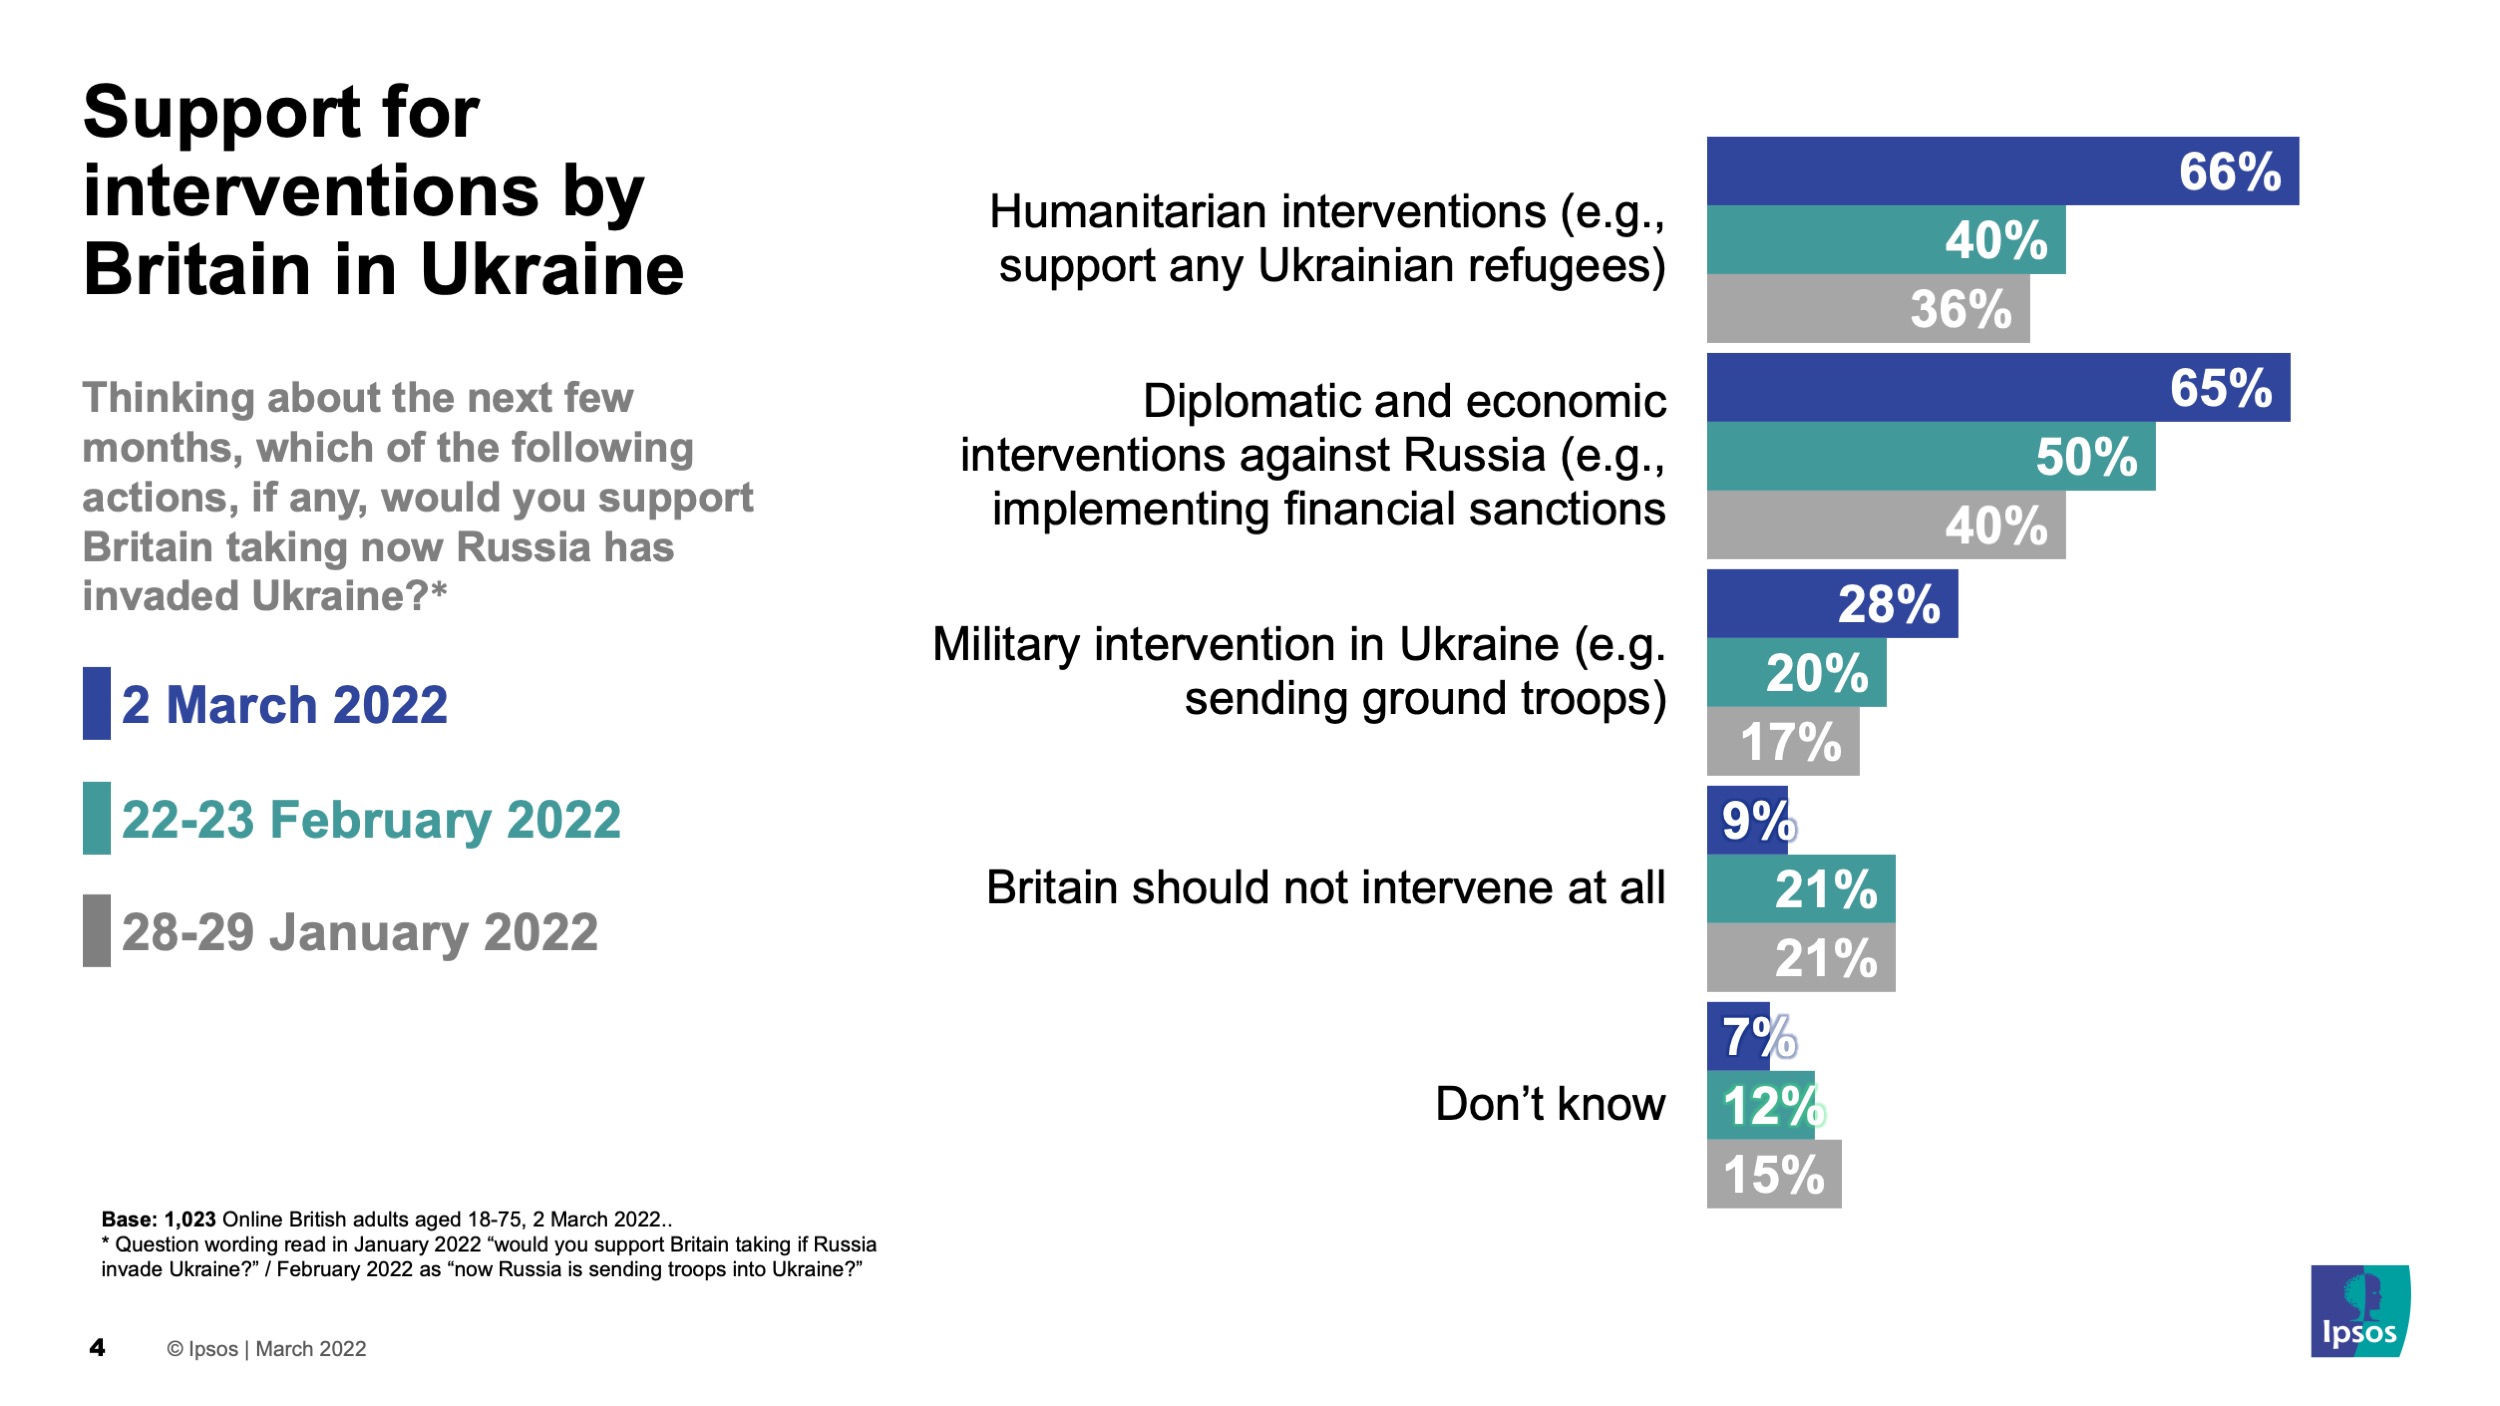 Chart showing support for different kinds of intervention in Ukraine